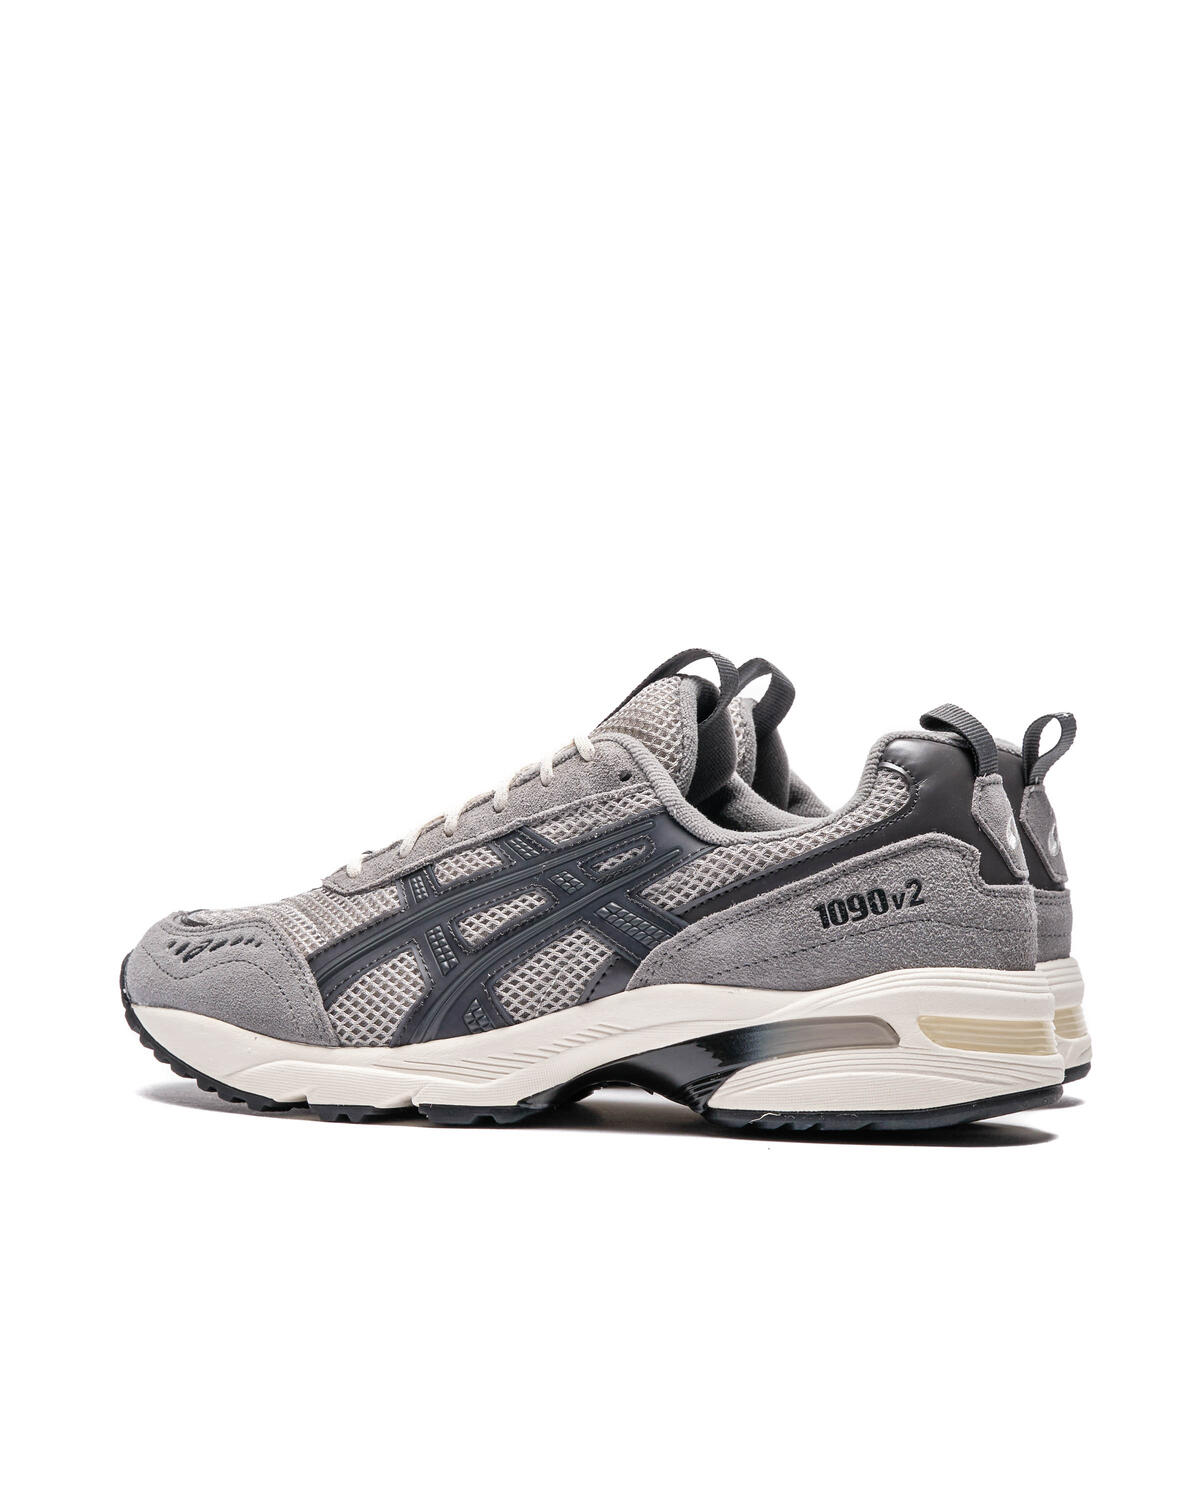 v2   HotelomegaShops STORE   Chaussures Asics GEL   Chaussures